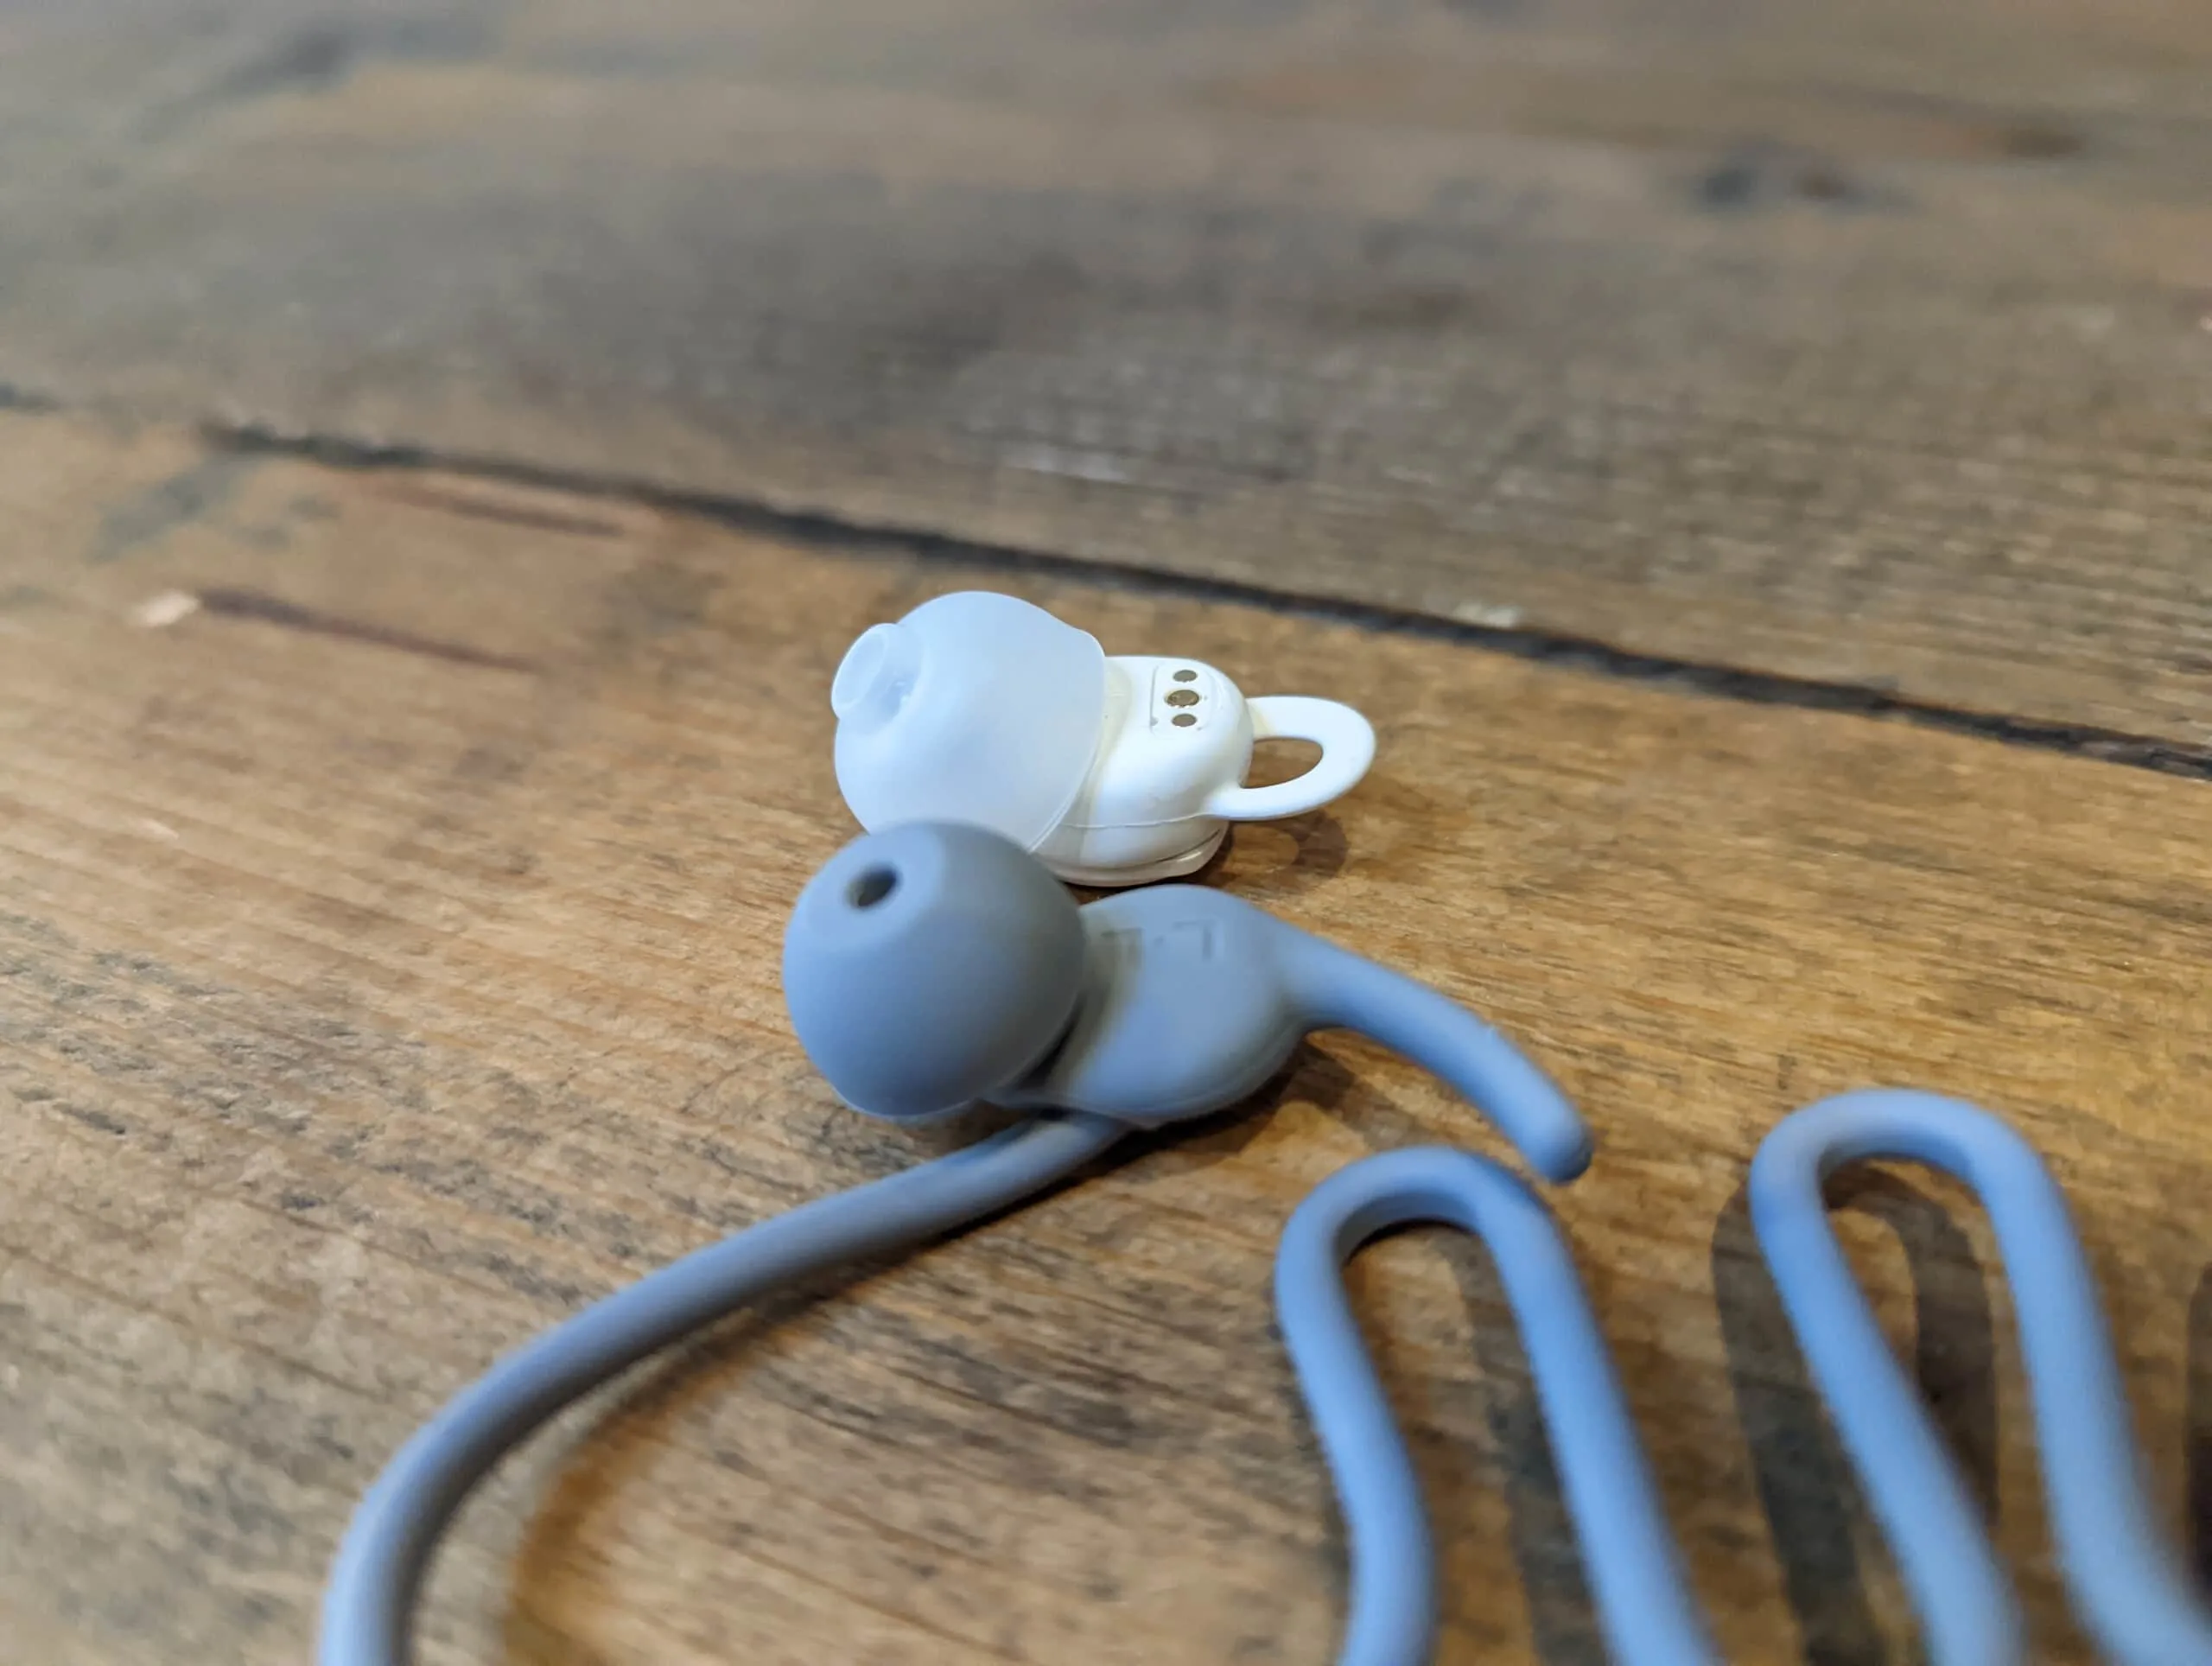 Anker Soundcore Sleep A10 vs Kokoon NightBuds scaled - Anker Soundcore Sleep A10 Bluetooth Earbuds Initial Impressions Review – Cheaper & arguably better vs Bose Sleepbuds, Kokoon Nightbuds and QuietOn